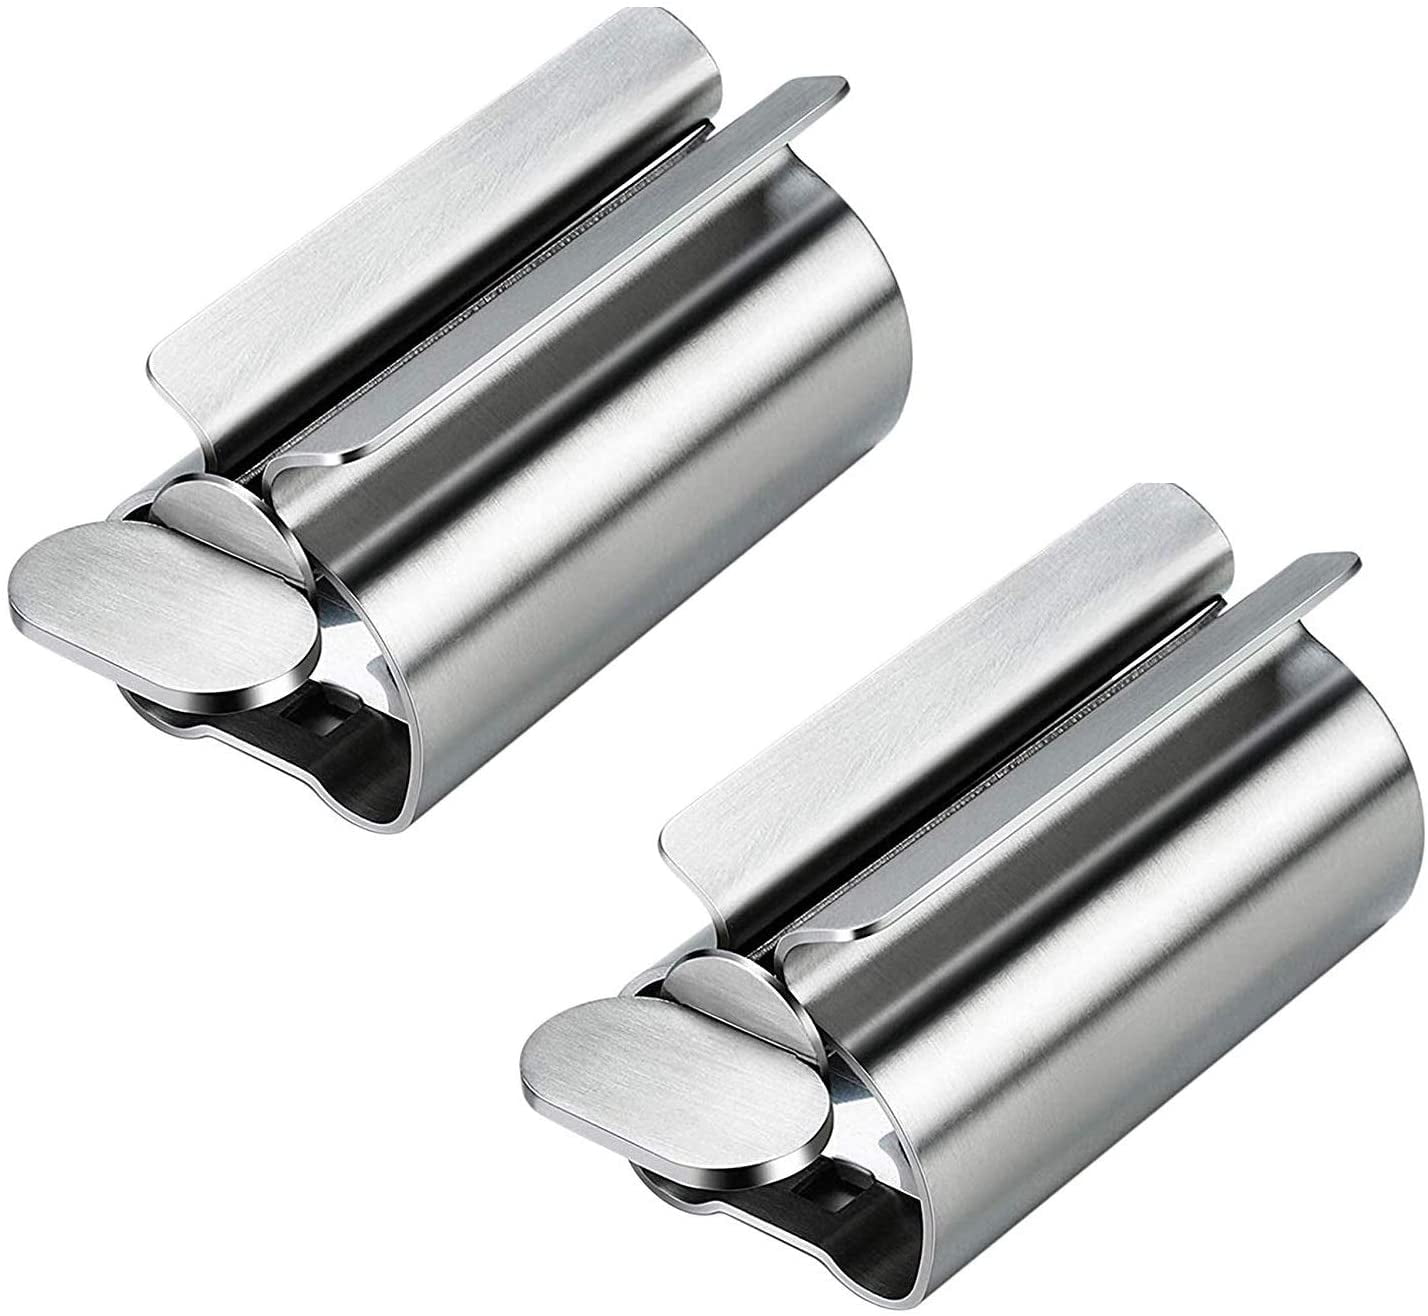 2 PACK TOOTHPASTE TUBE SQUEEZERS STAINLESS STEEL ! 